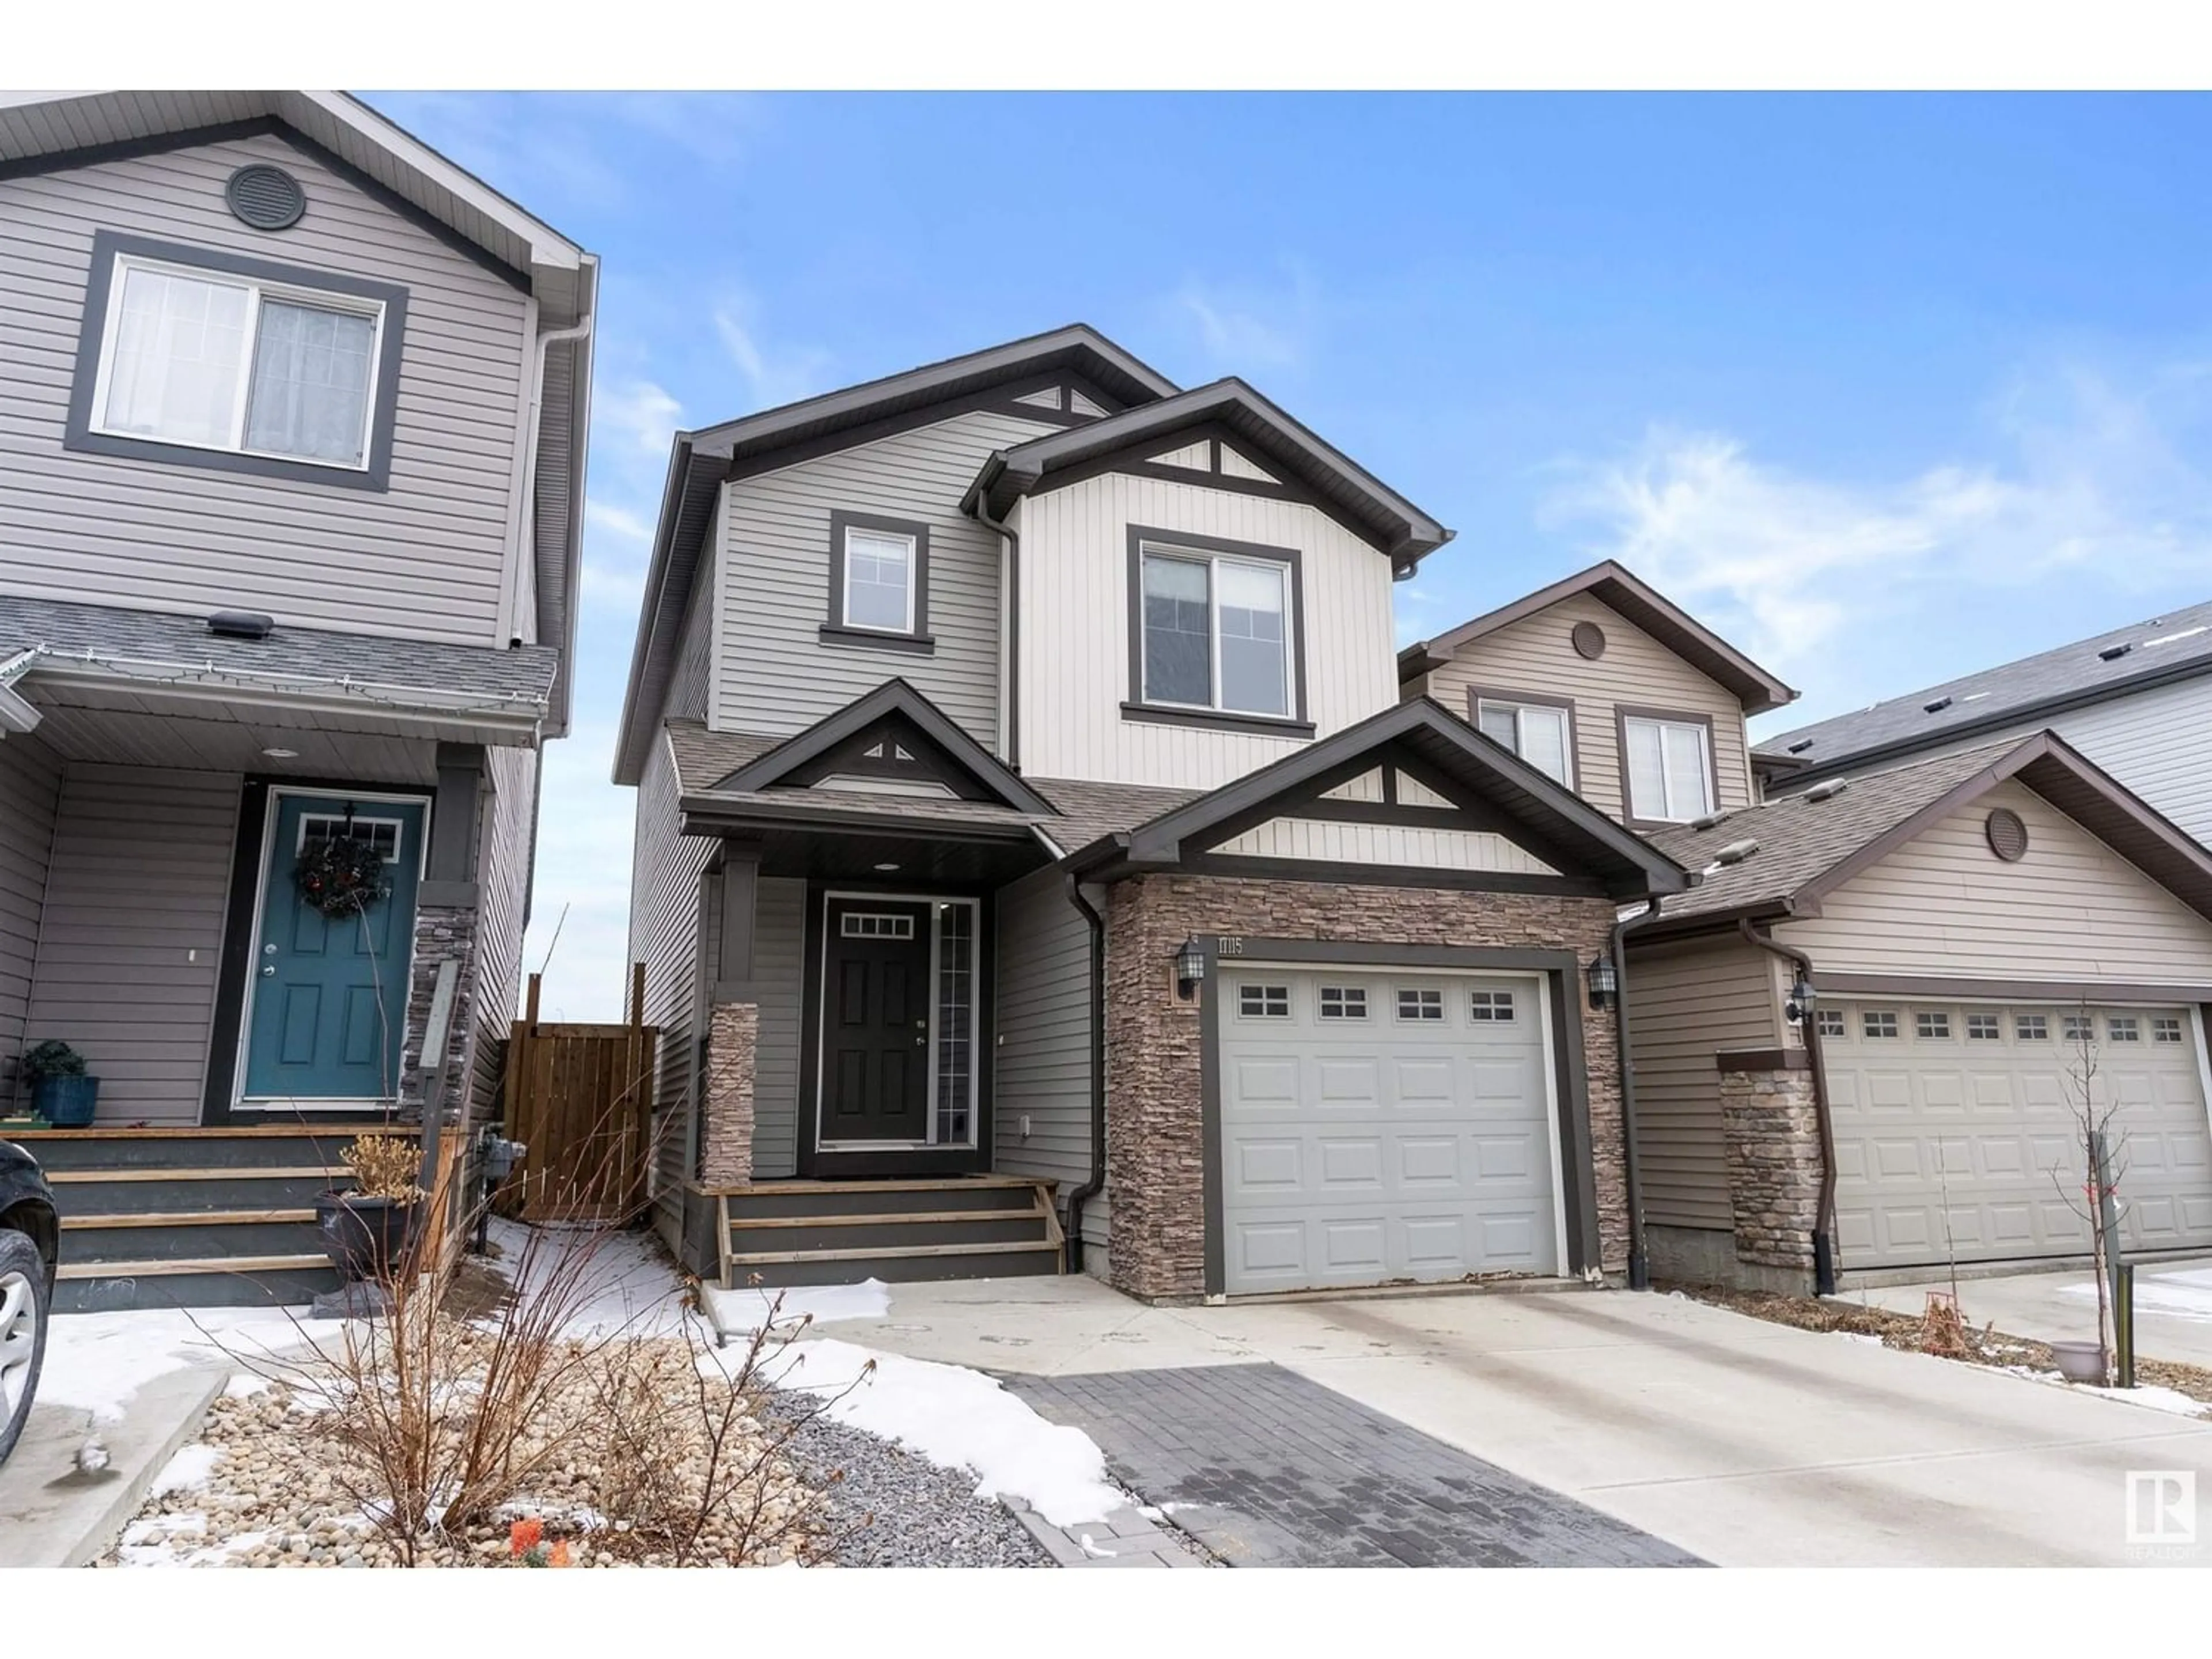 Frontside or backside of a home for 17115 38 ST NW, Edmonton Alberta T5Y3R7